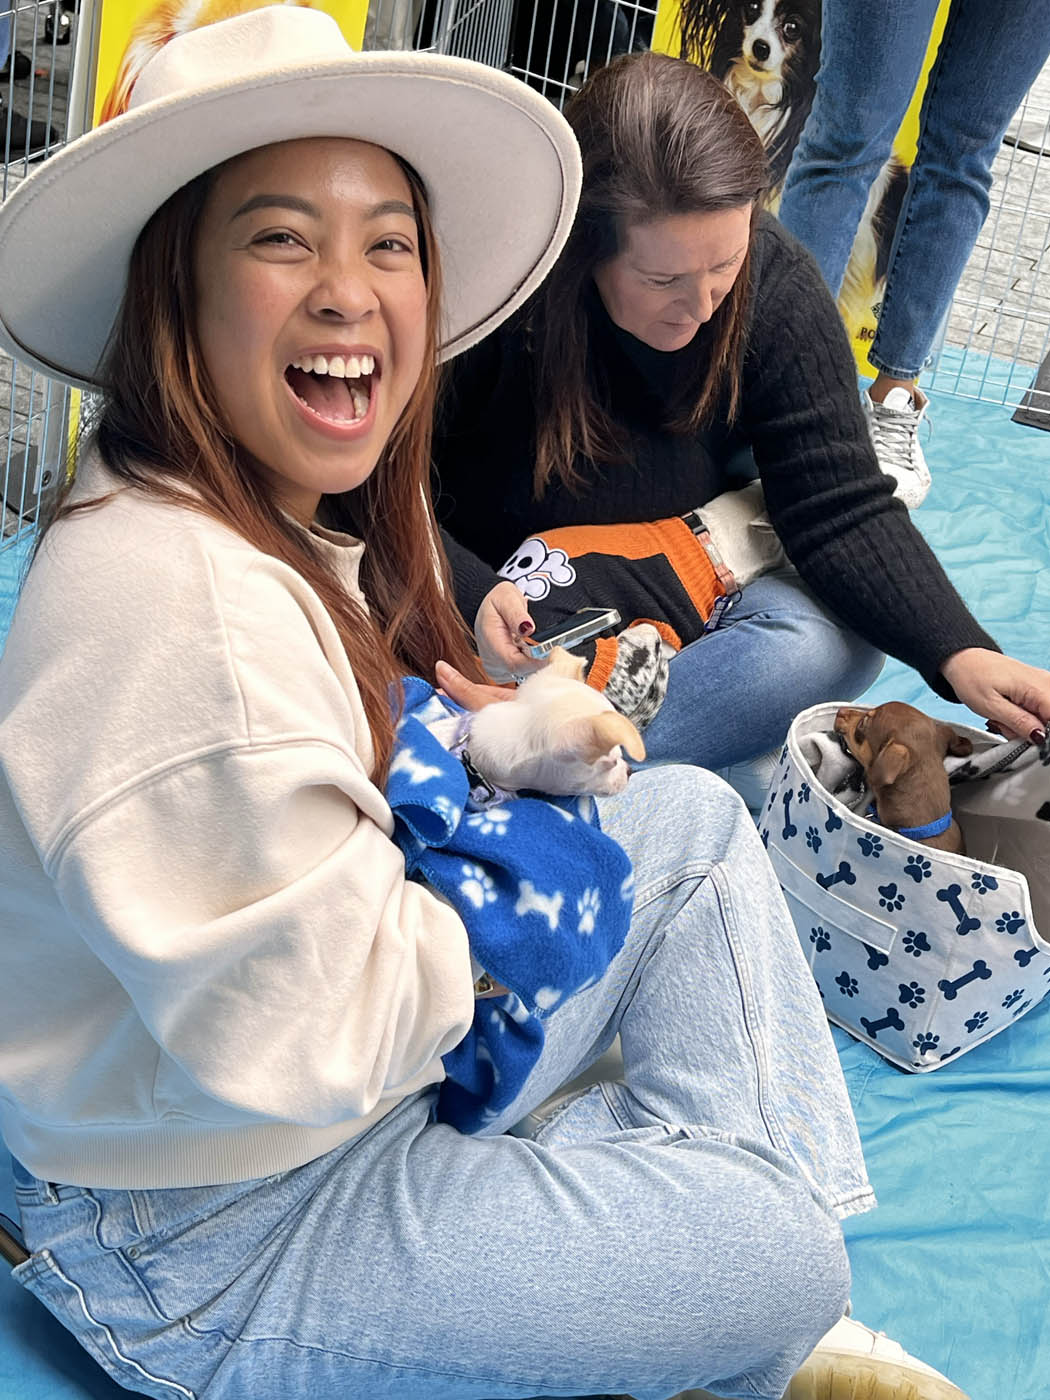 A girl in white clothing holding an adorable Puppy Love furry companion - Silicon Valley / Bay Area company wellness programs.